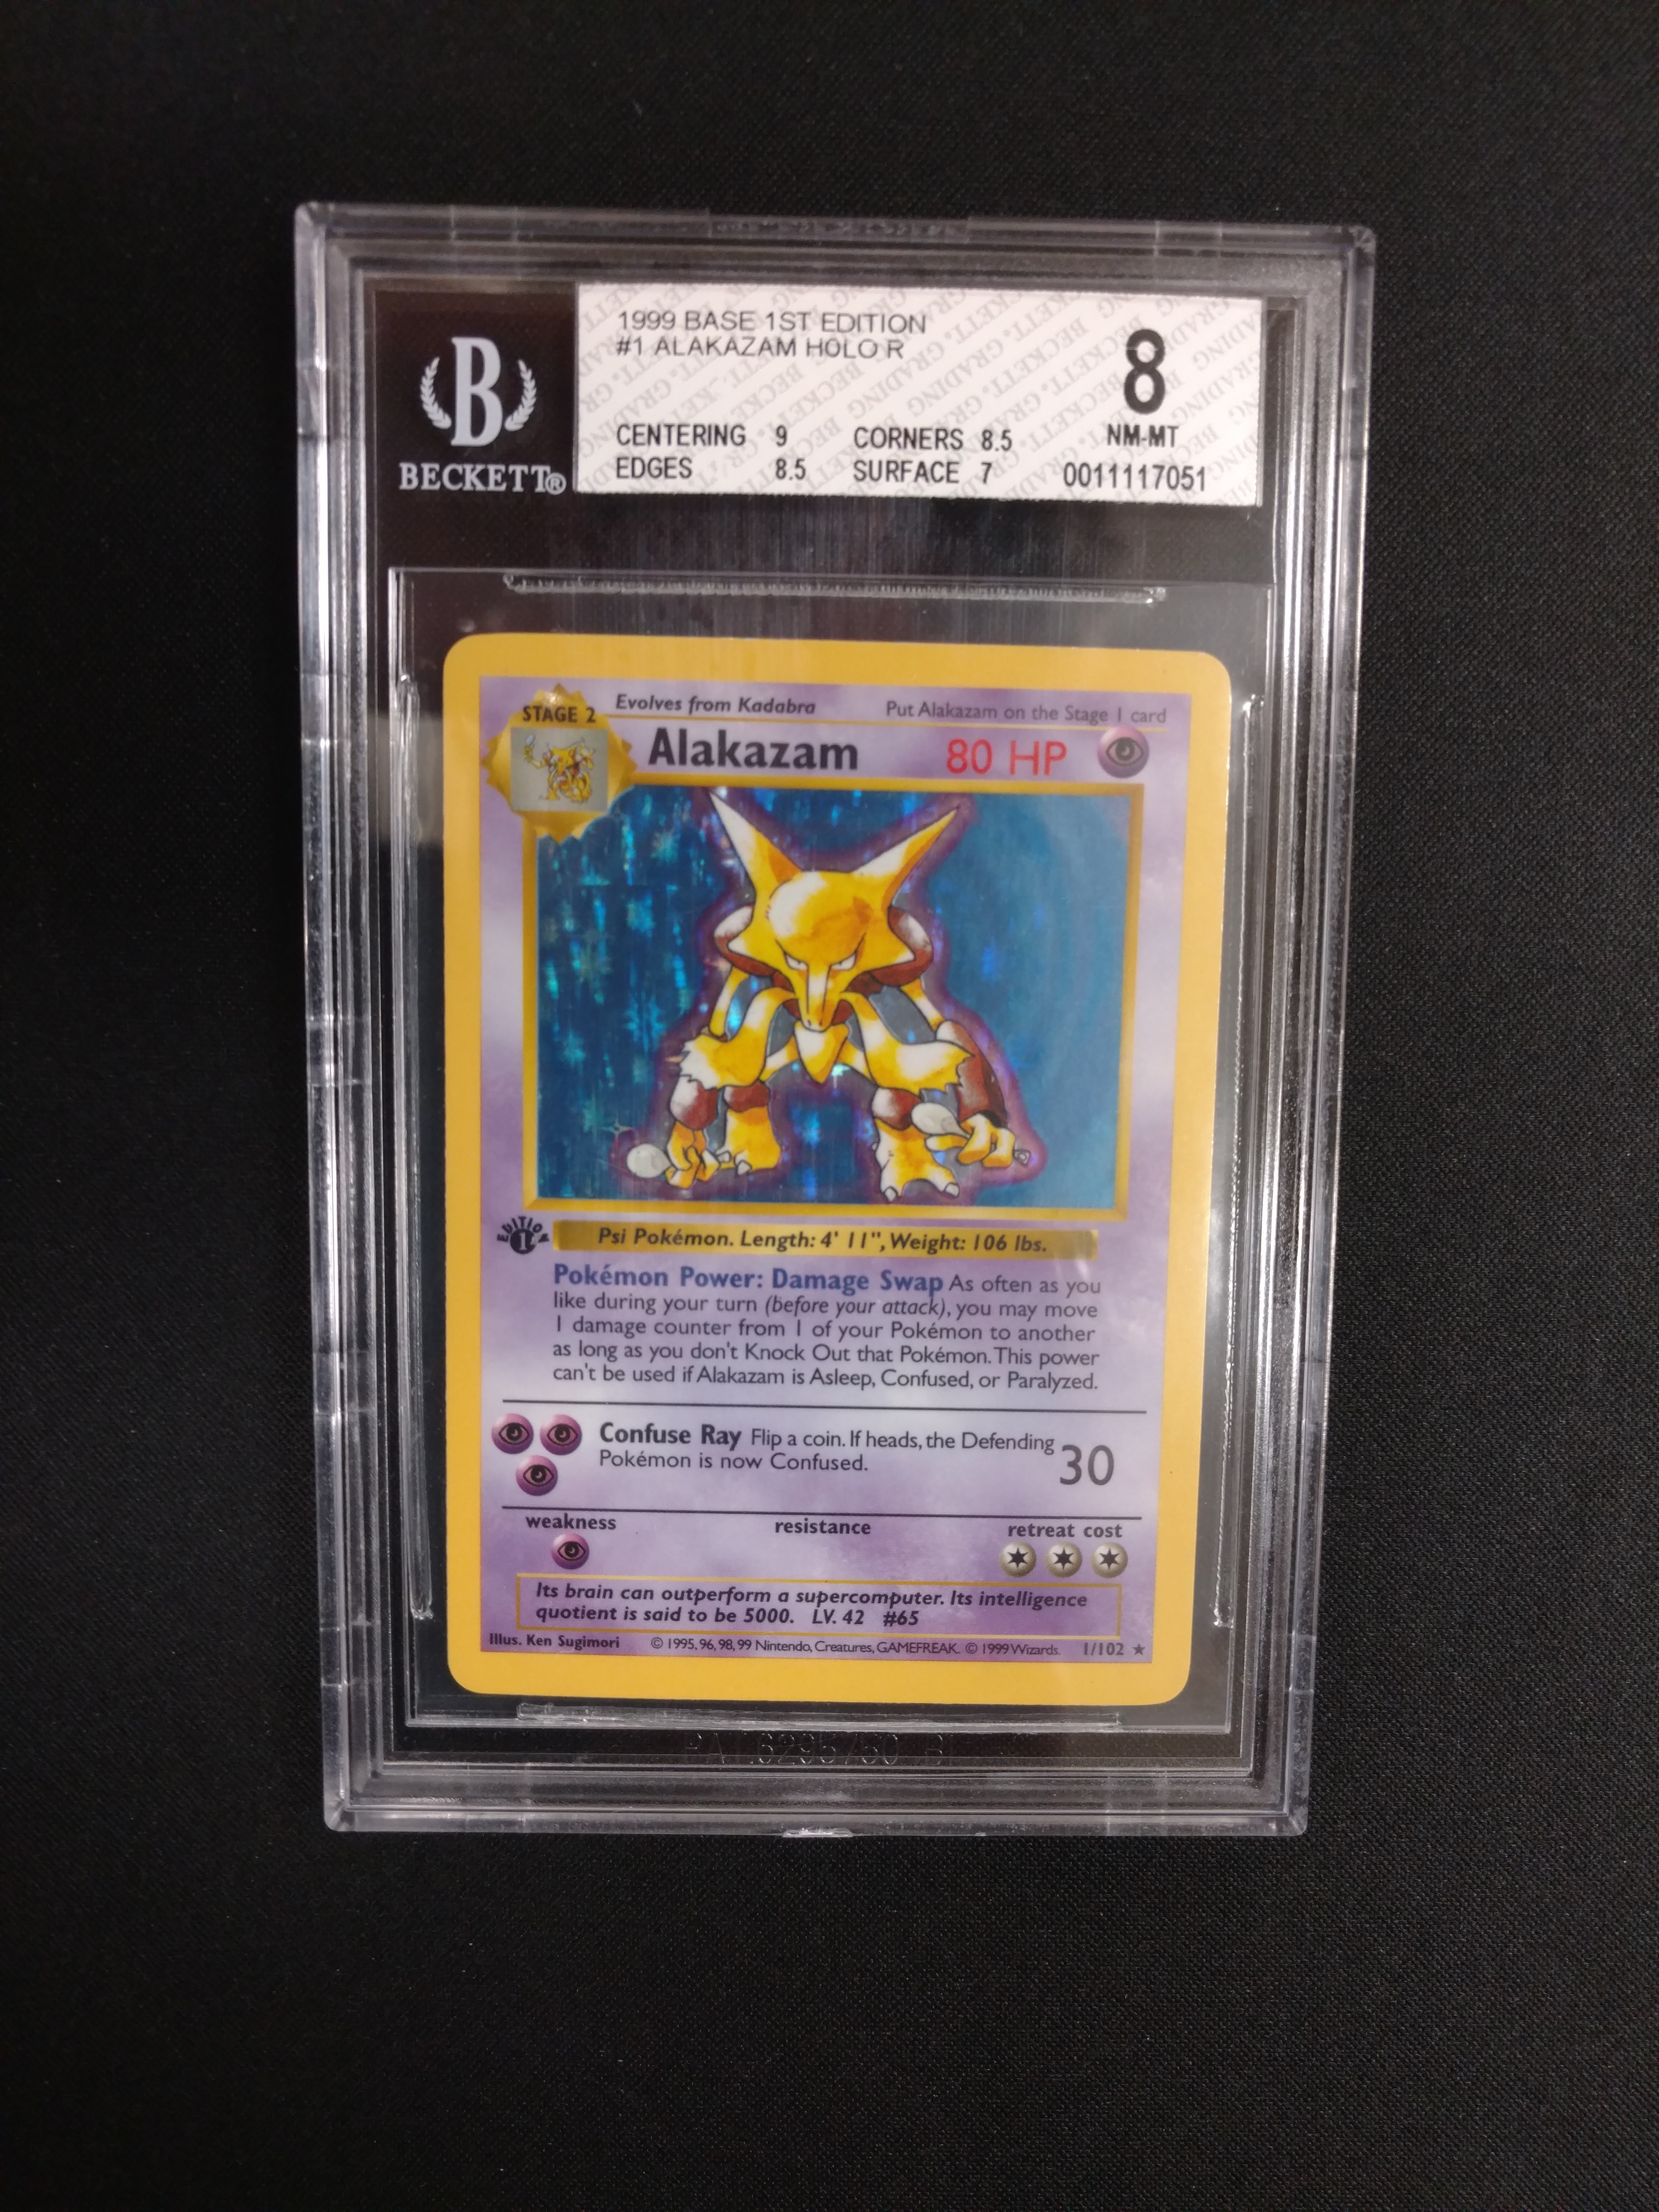 SERIES 2-1 Graded Card & Booster Per Pokemon Graded Card Mystery Power Pack